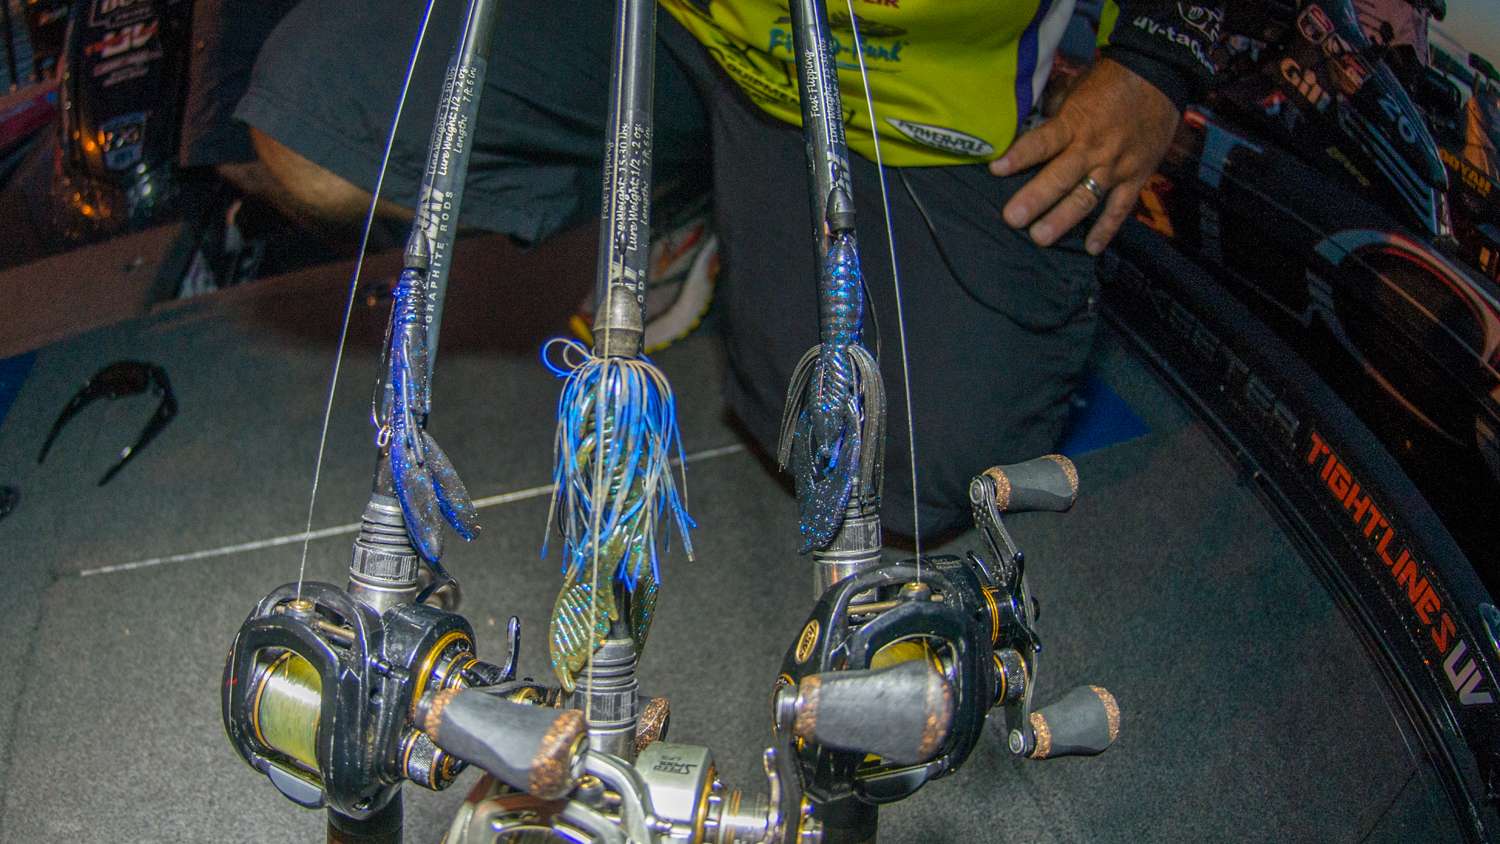 Lowen used a sapphire blue, rigged with a 1/4-ounce Reins TB Tungsten Slip Sinker and 3/0 Mustad Grip Pin Max hook. Alternatively, he rigged a green pumpkin version with the same hook and a 1-ounce sinker. For more strike appeal he added a blue jig skirt from Lure Parts Online. 